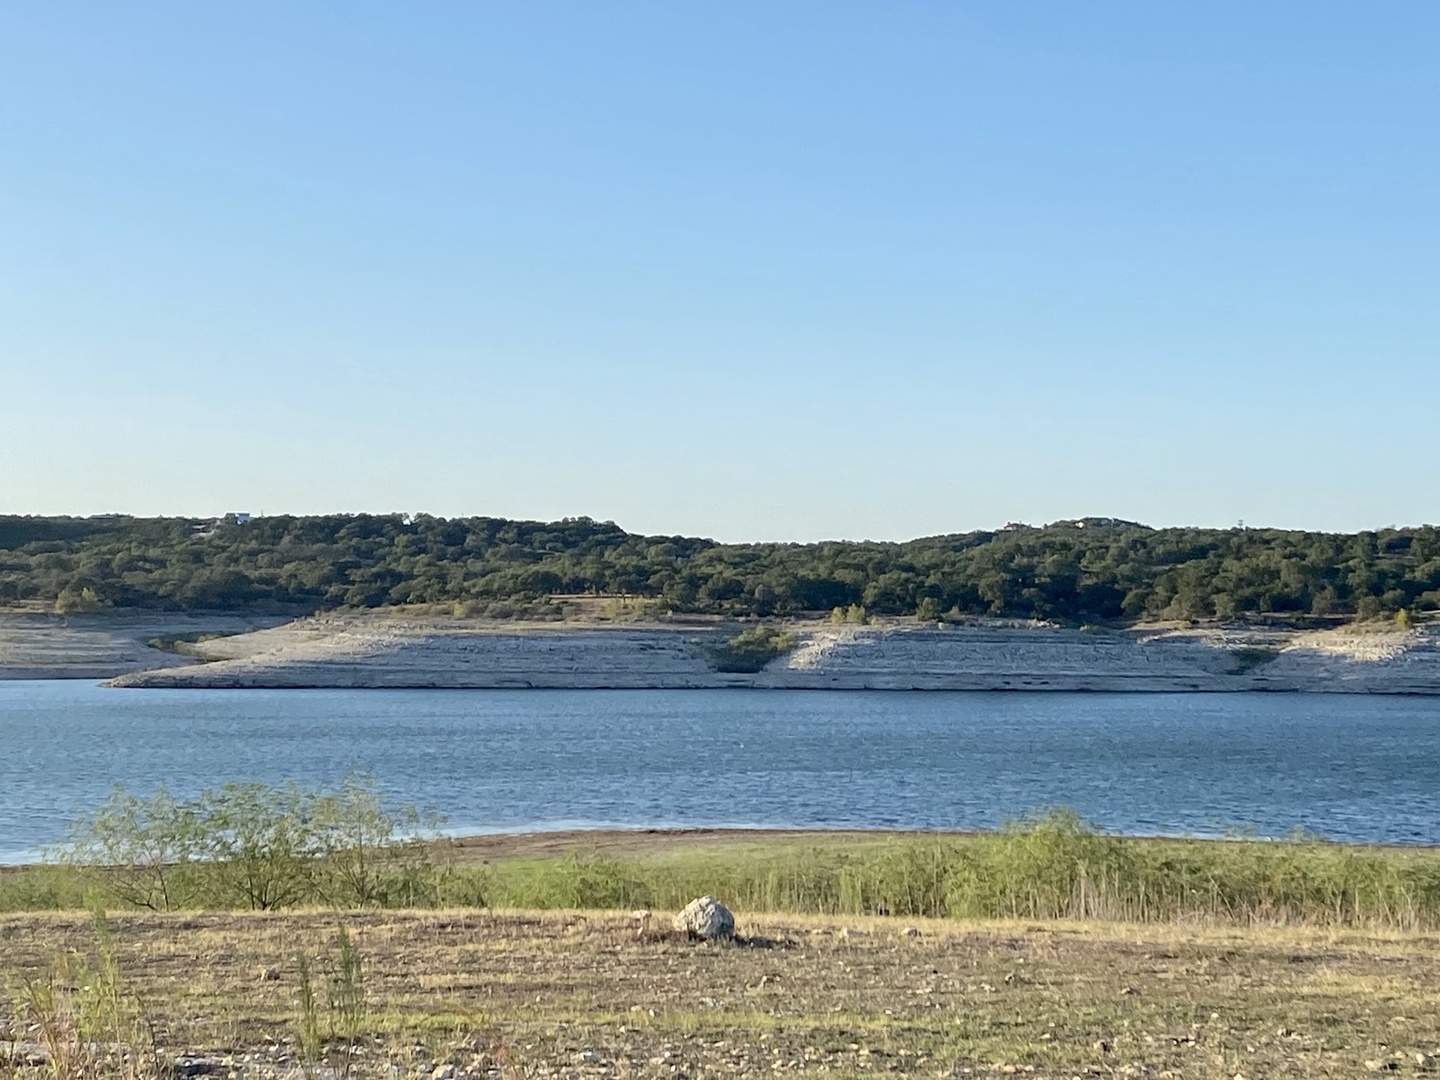 Lake Travis offers endless fun with boating, water skiing, wakeboarding, kayaking, paddle boarding, and fishing!